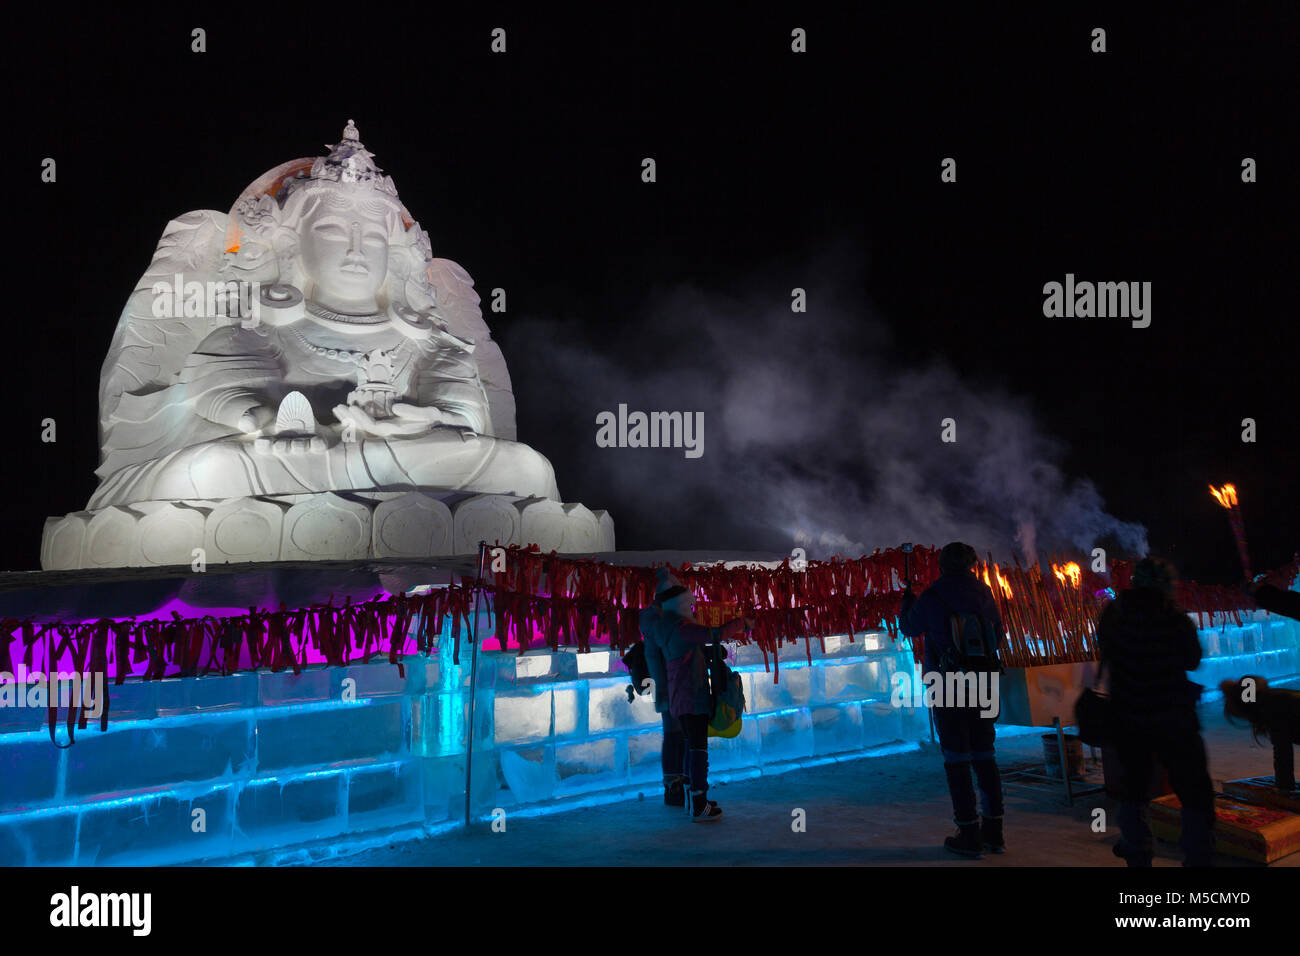 Night scenes from the Harbin Ice Festival, Heilongjiang, China. Ice sculpture of the Chinese Goddess of Mercy, Guanyin. Stock Photo